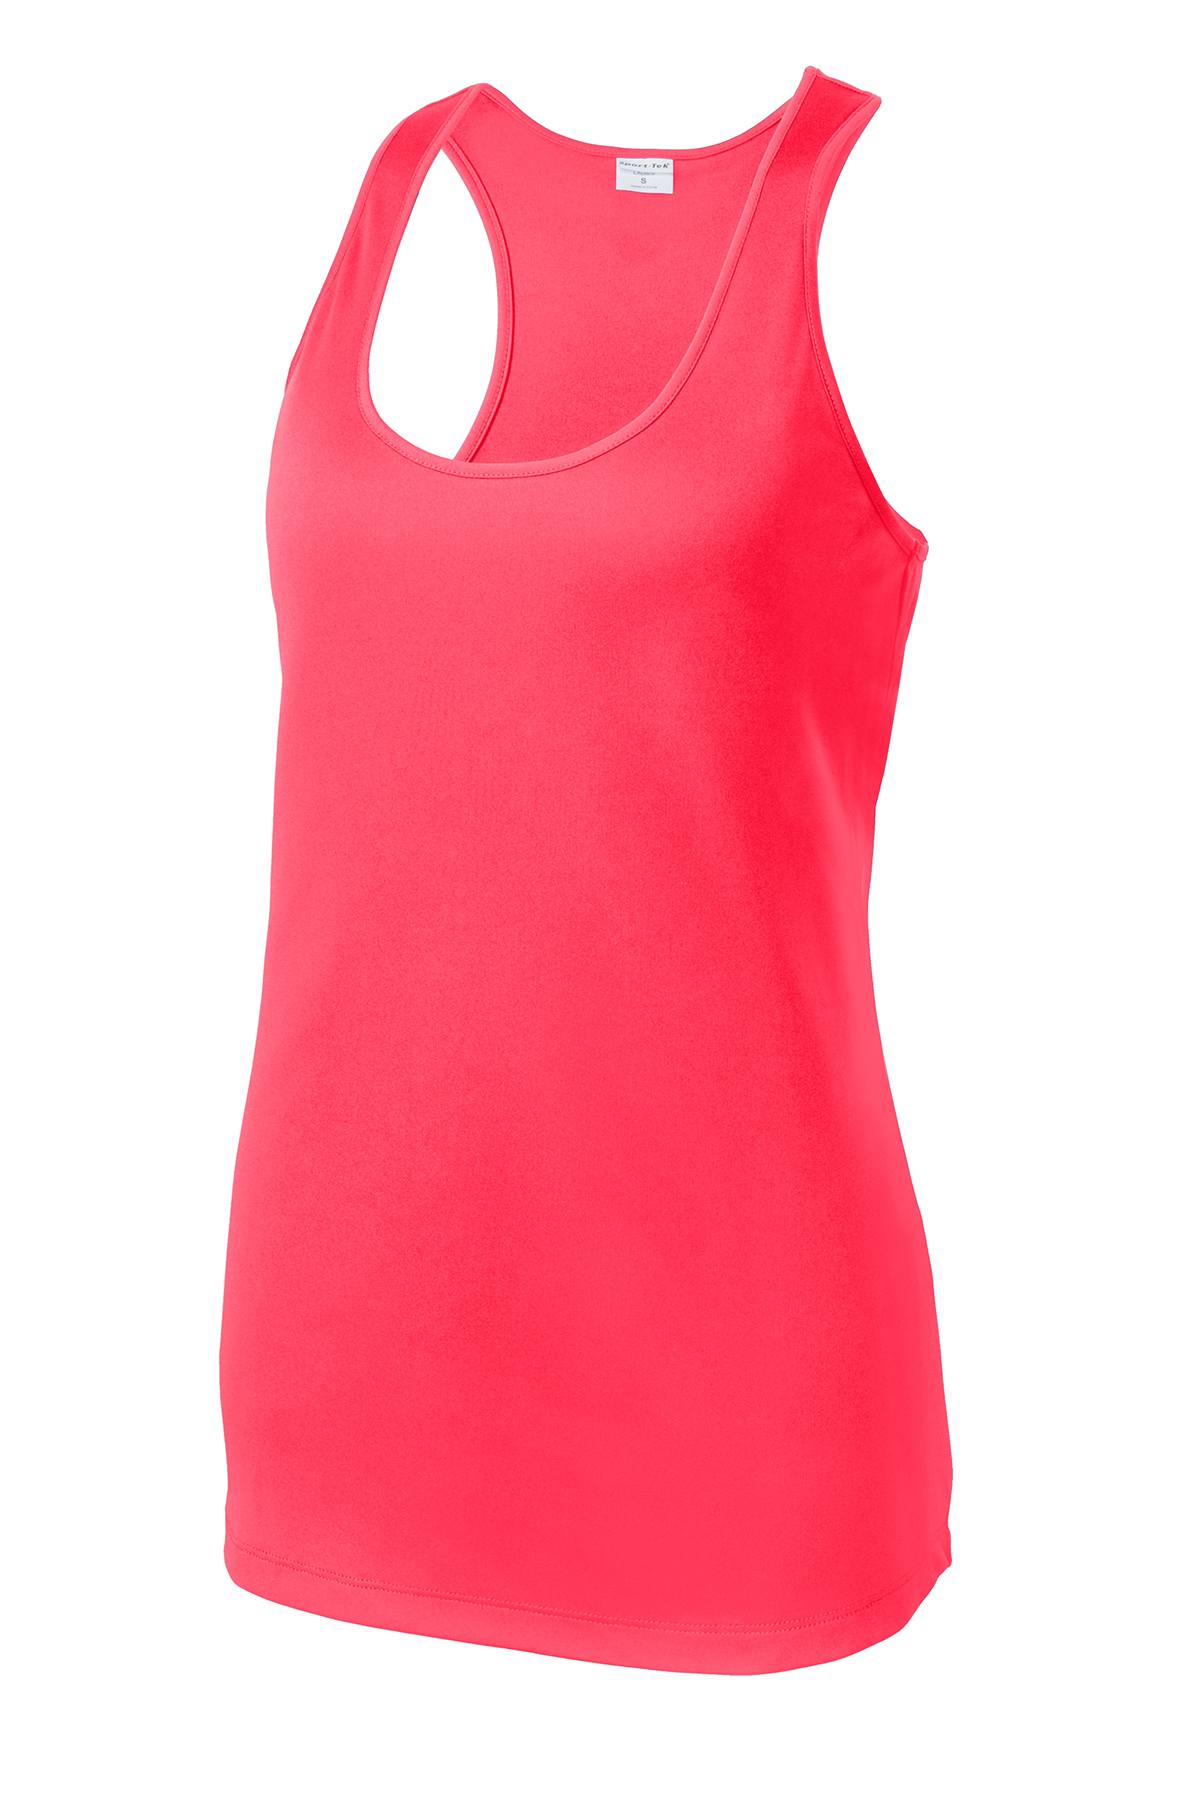 Cottonique Women's Hypoallergenic Racer Back South Africa